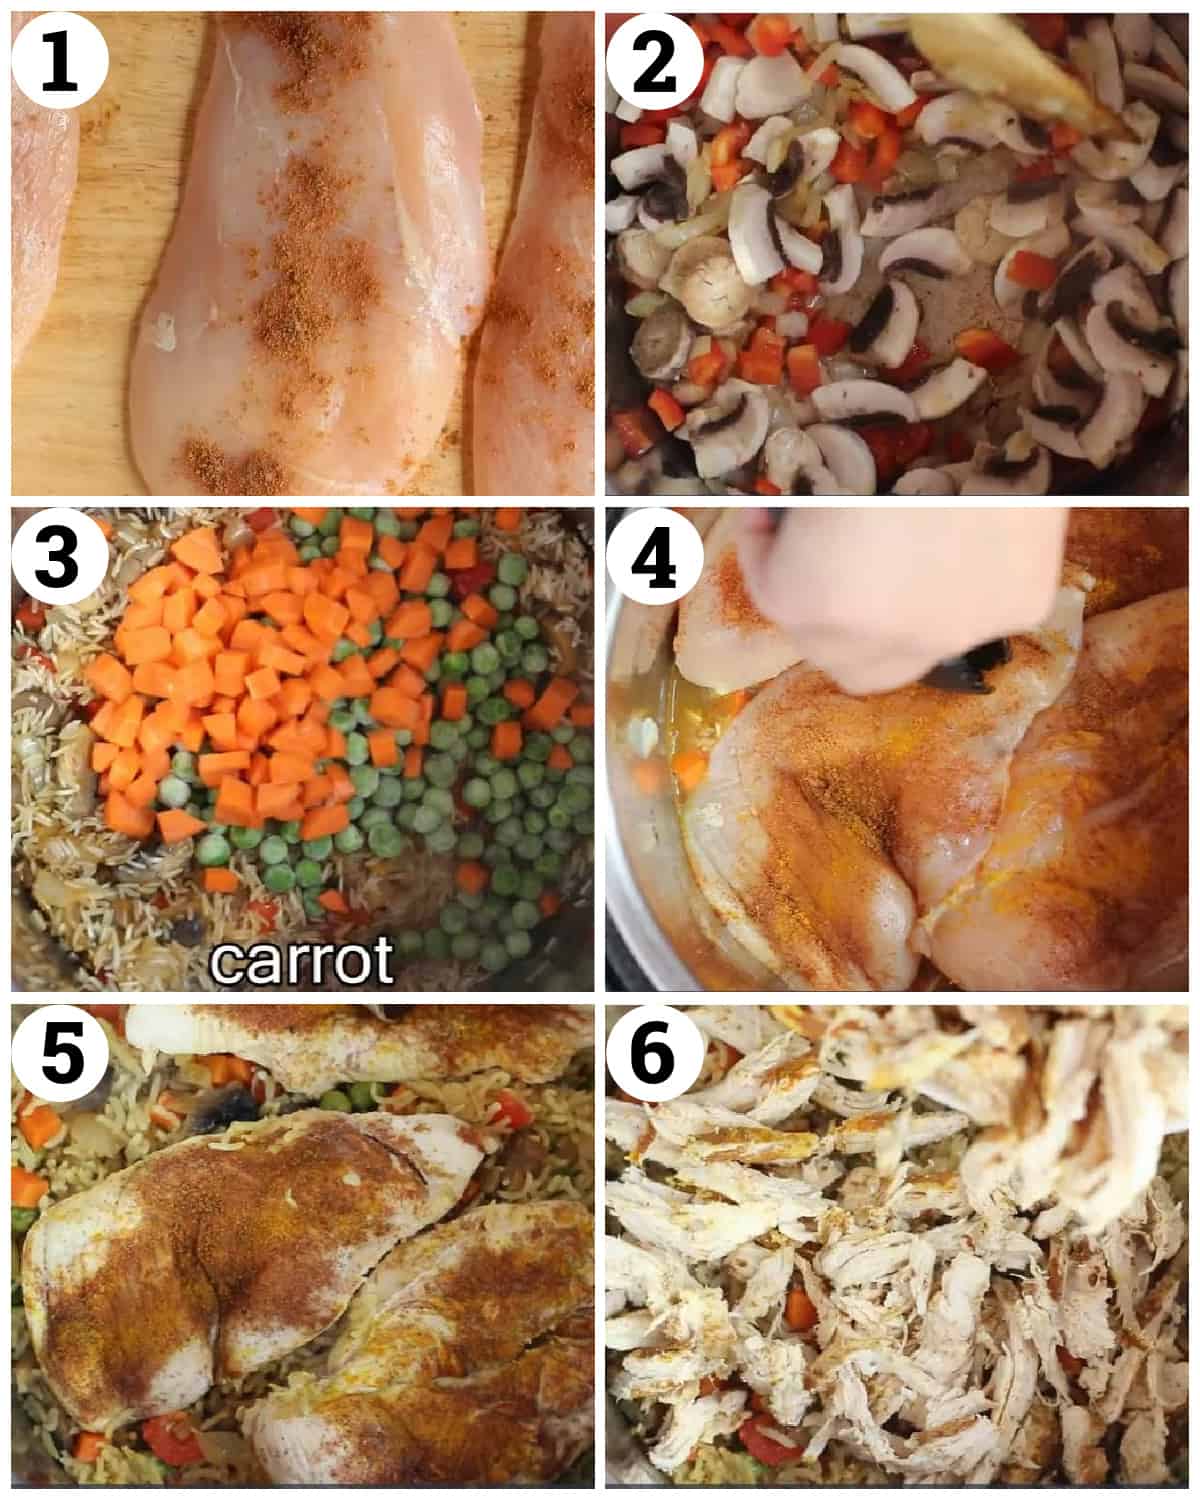 season the chicken, saute the vegetables then add the rice and chicken and water. Cook then shred the chicken and serve. 